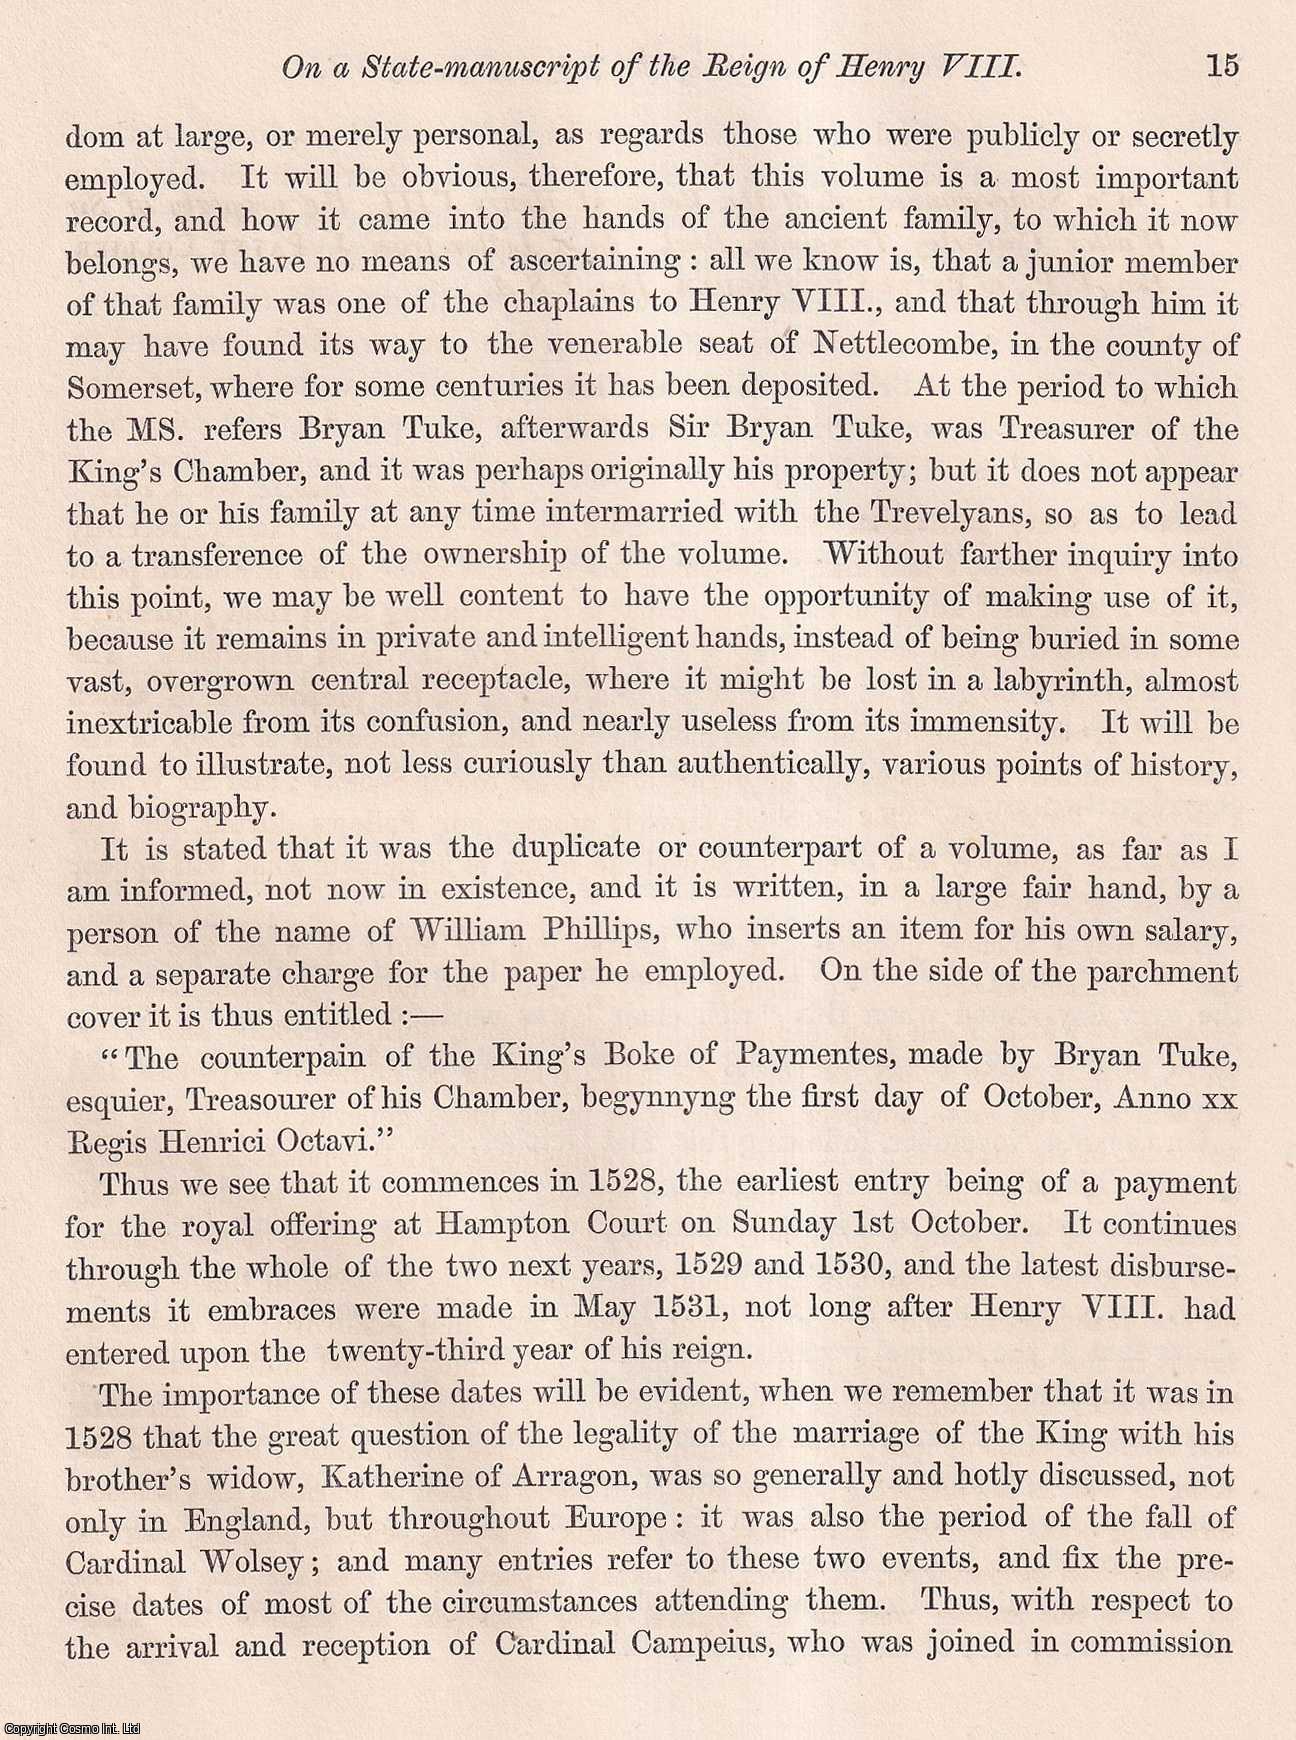 J. Payne Collier, Esq., V.P. - On a State-manuscript of the Reign of Henry VIII., the property of Sir Walter Calverley Trevelyan, Bart. An uncommon original article from the journal Archaeologia, 1855.